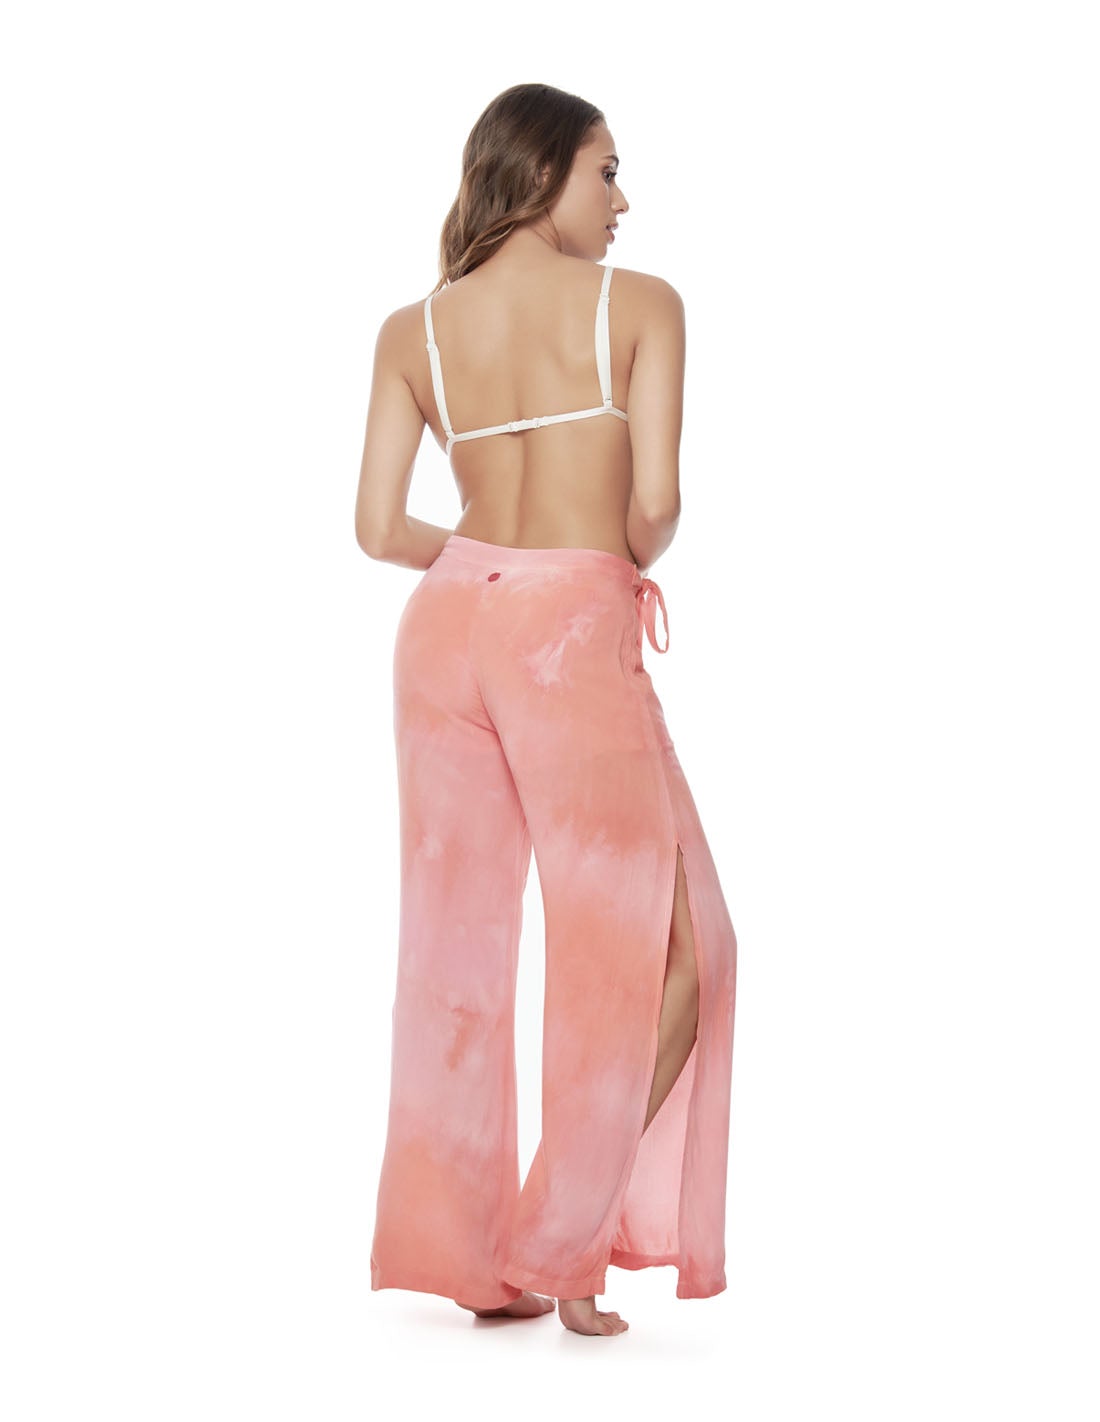 Earth Pant Heart Rose. Hand-Dyed Beach Pant In Heart Rose. Entreaguas